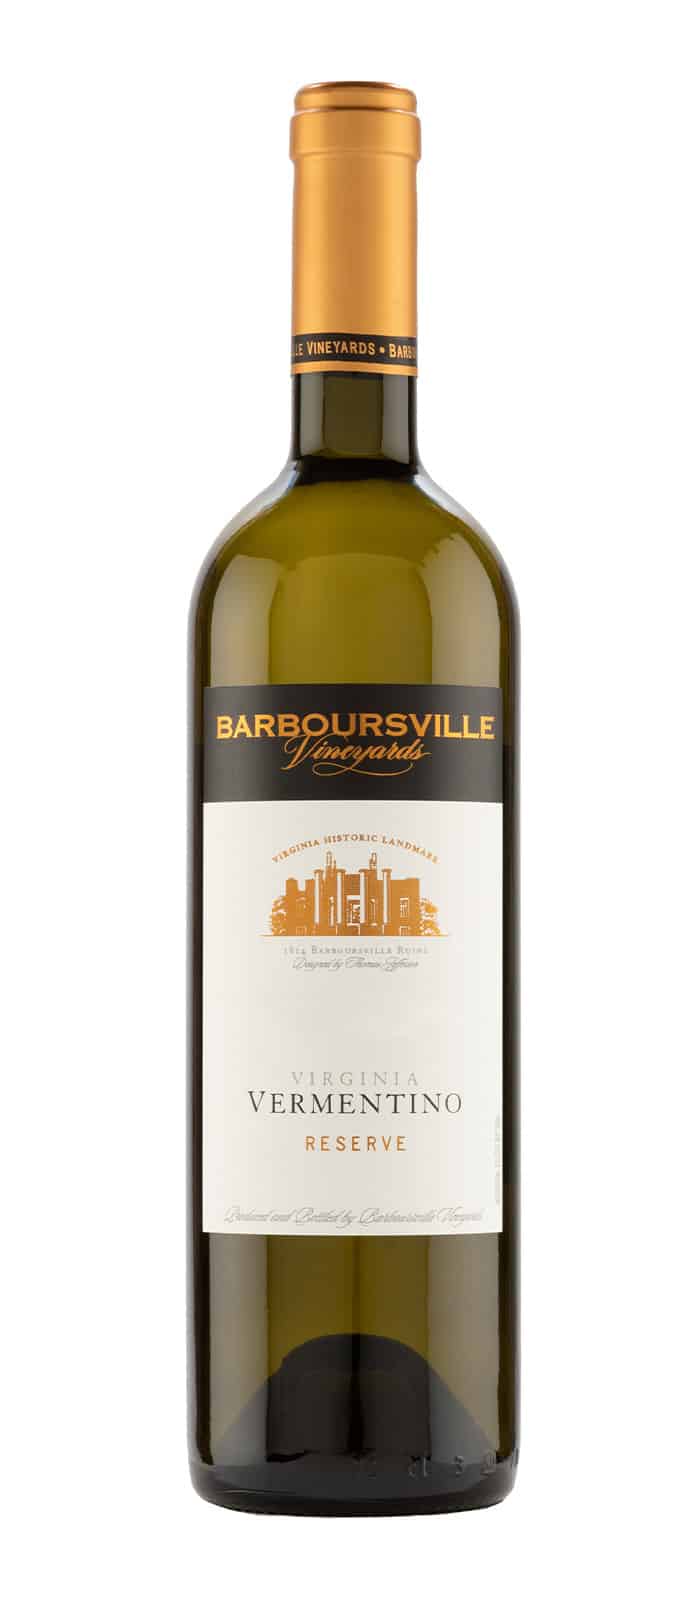 Bottle of Barboursville Vineyards, Virginia Vermentino Reserve, Gold Medal, Virginia Governor's Cup Wine Competition.